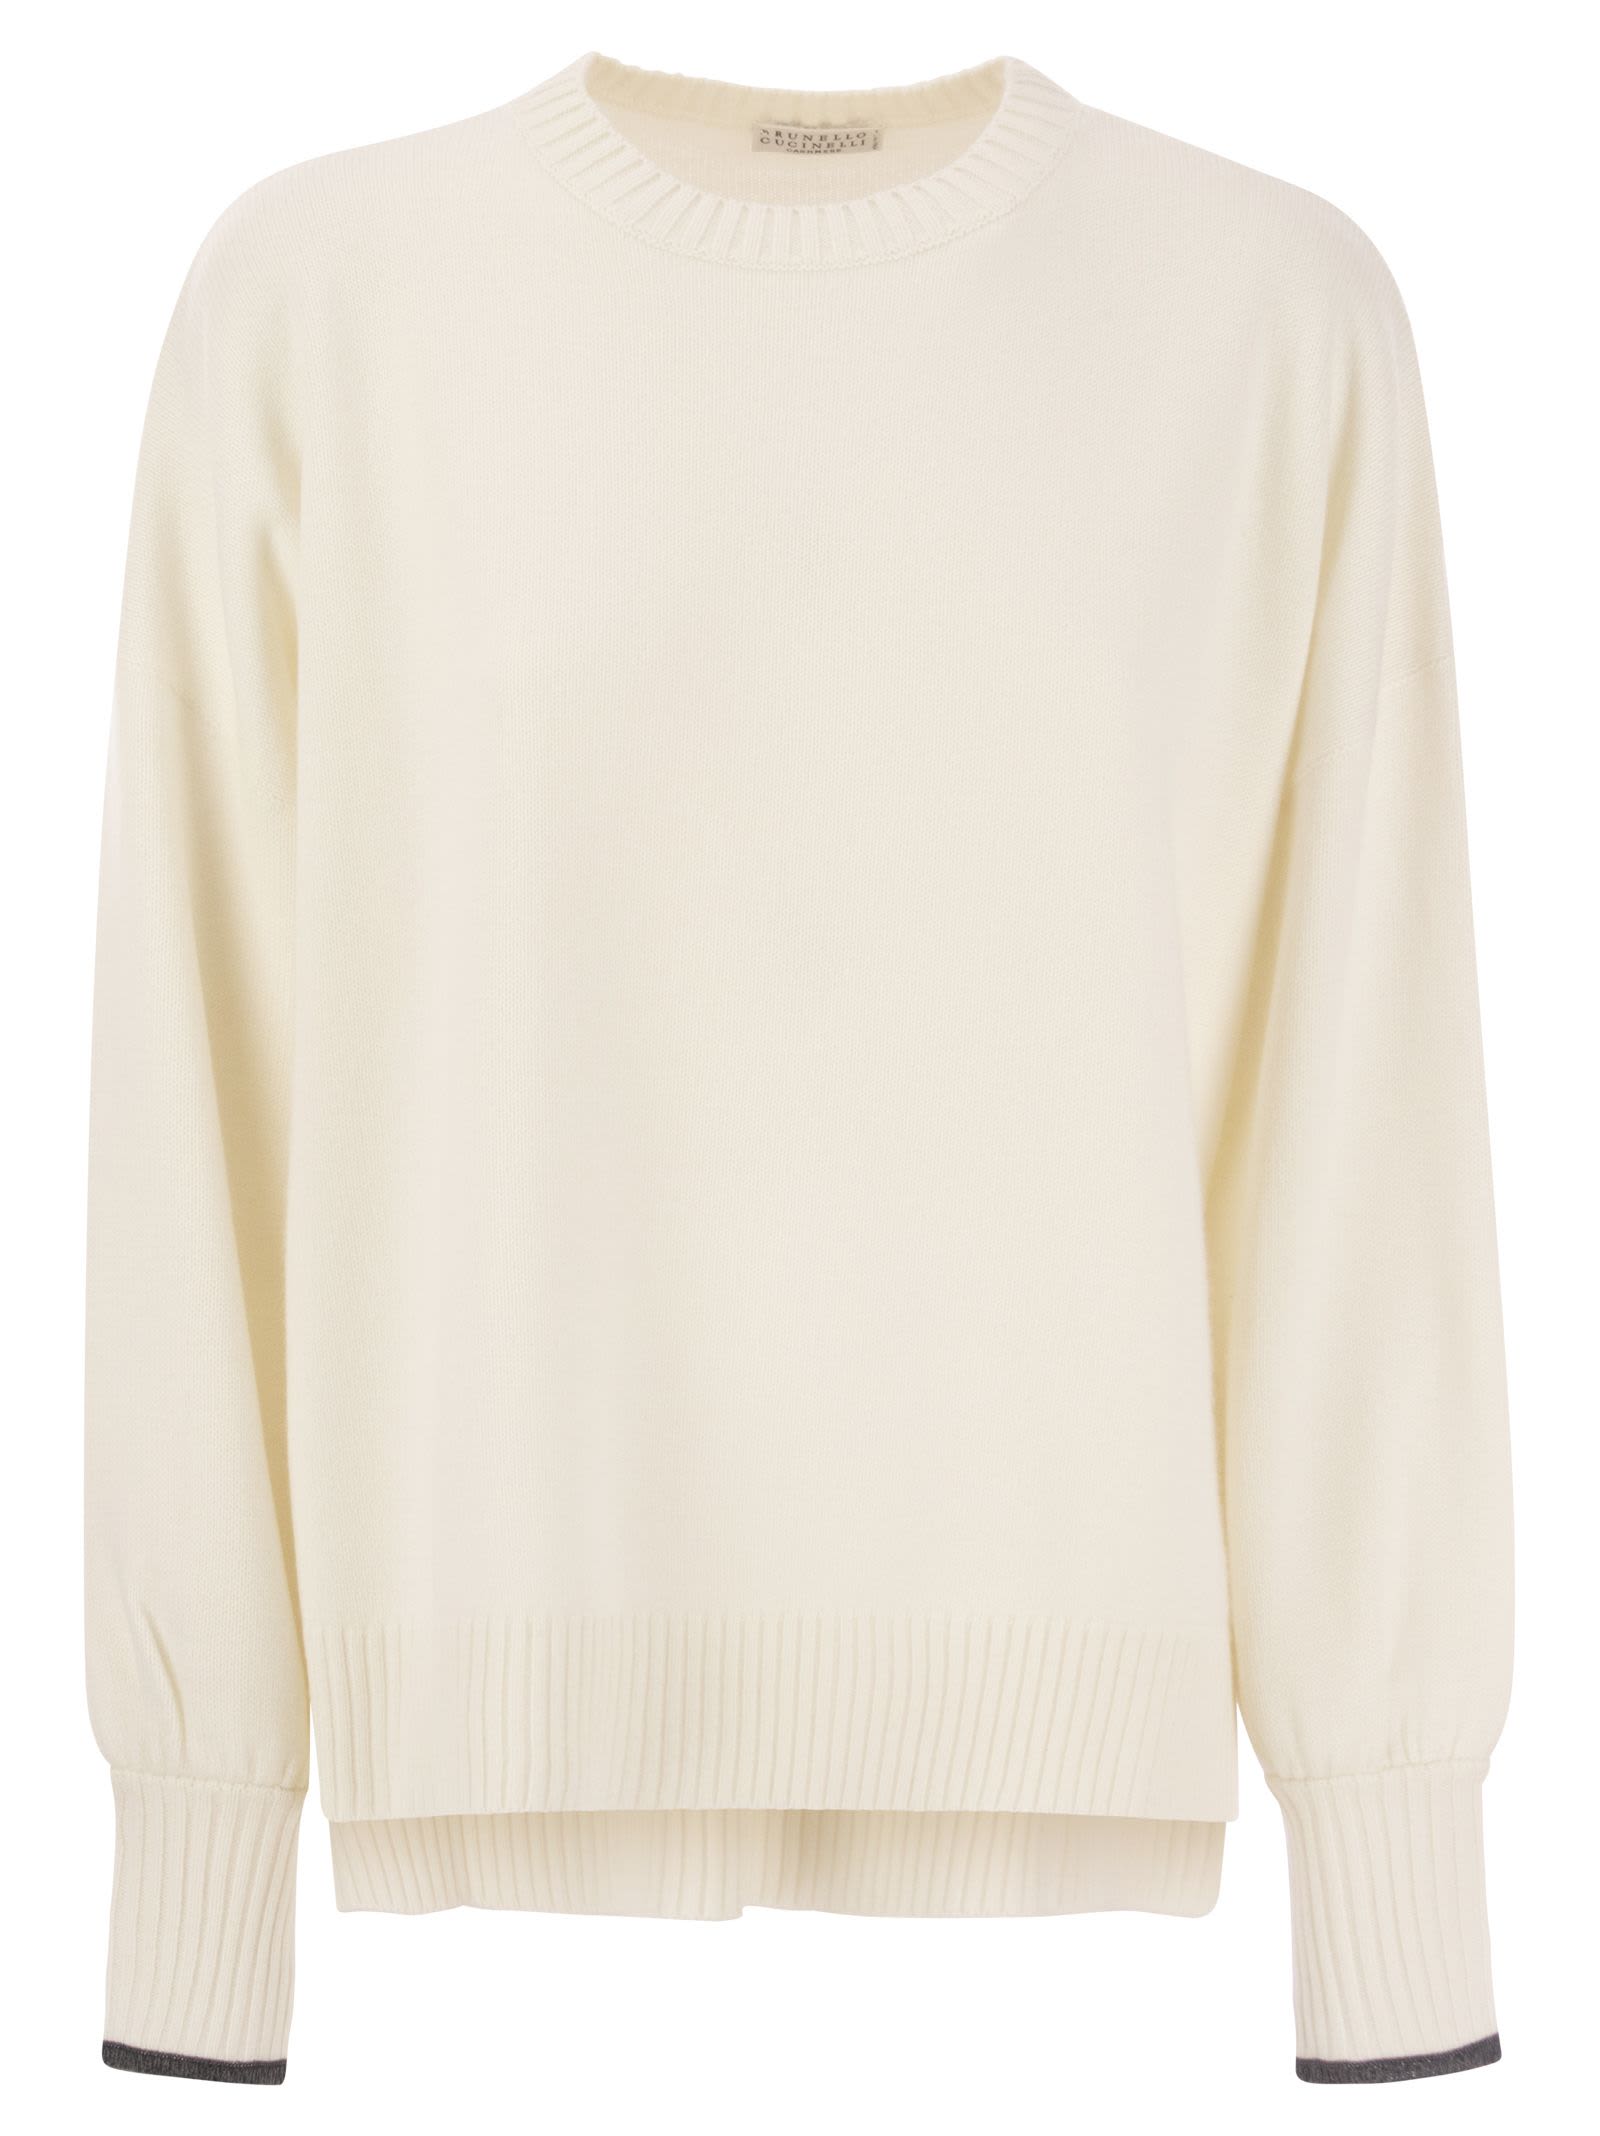 Shop Brunello Cucinelli Cashmere Knit With Shiny Contrast Cuffs In White